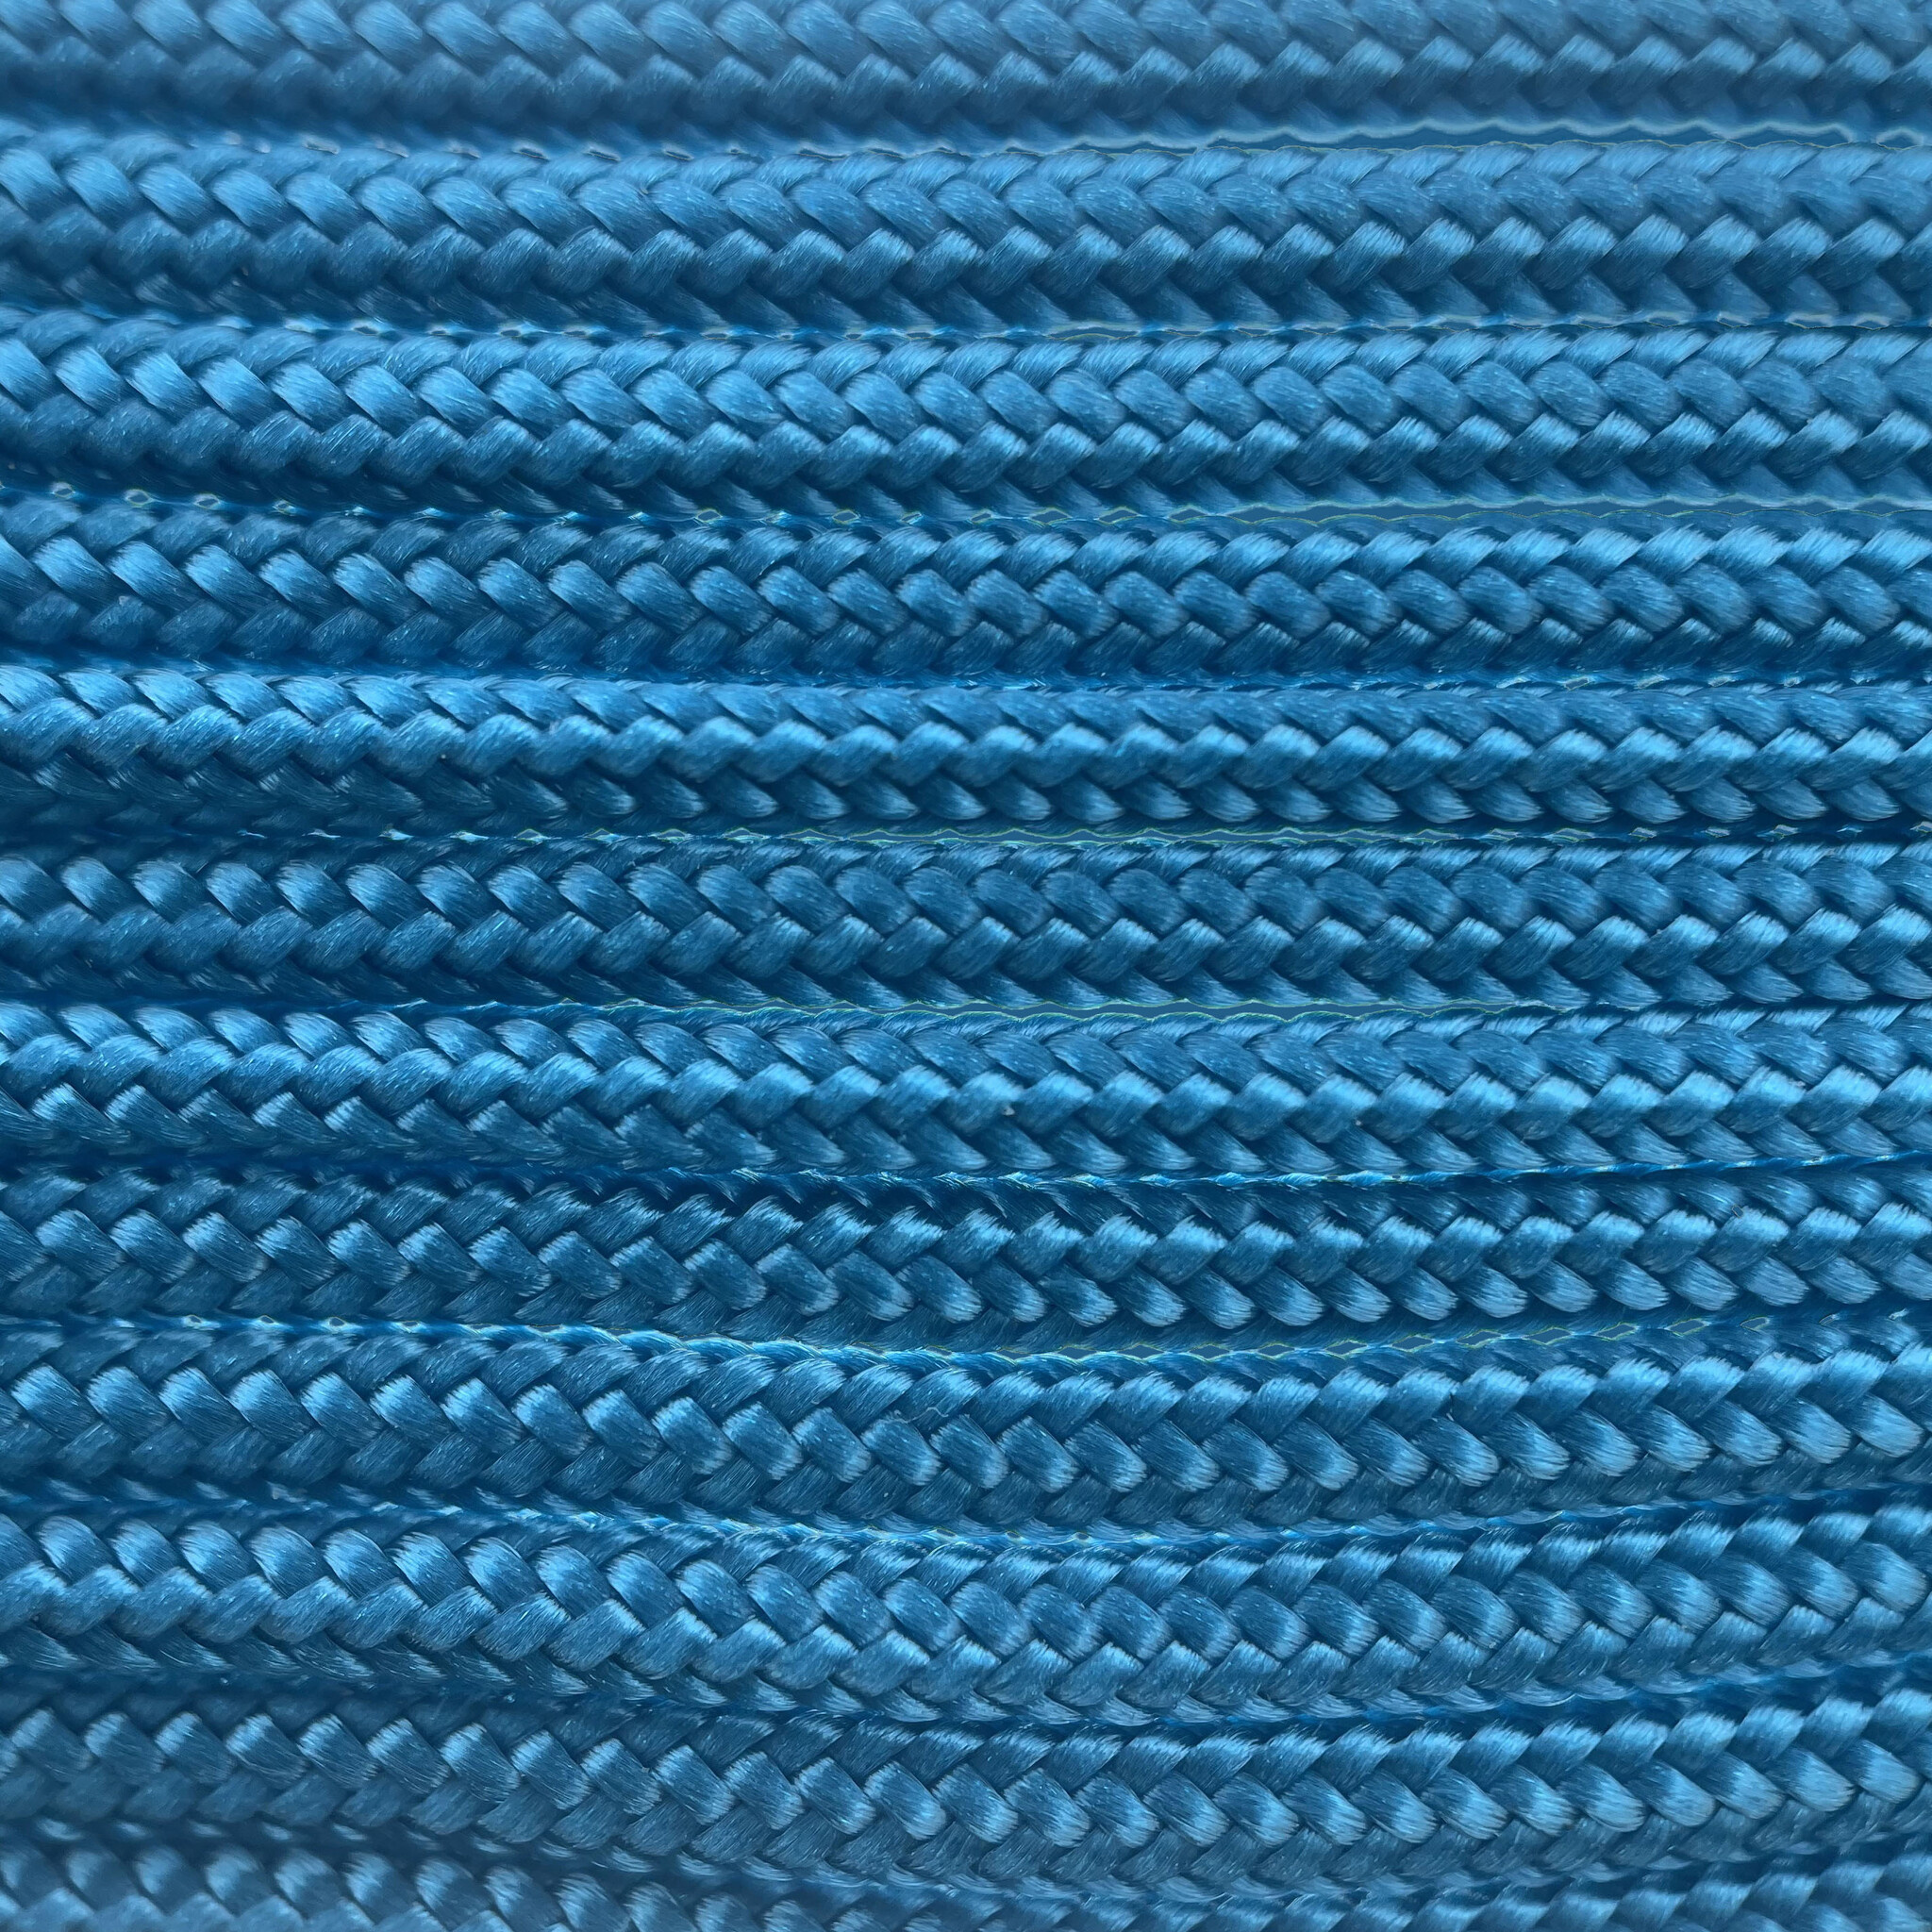 Buy Paracord 100 type I Deep Ocean from the expert - 123Paracord